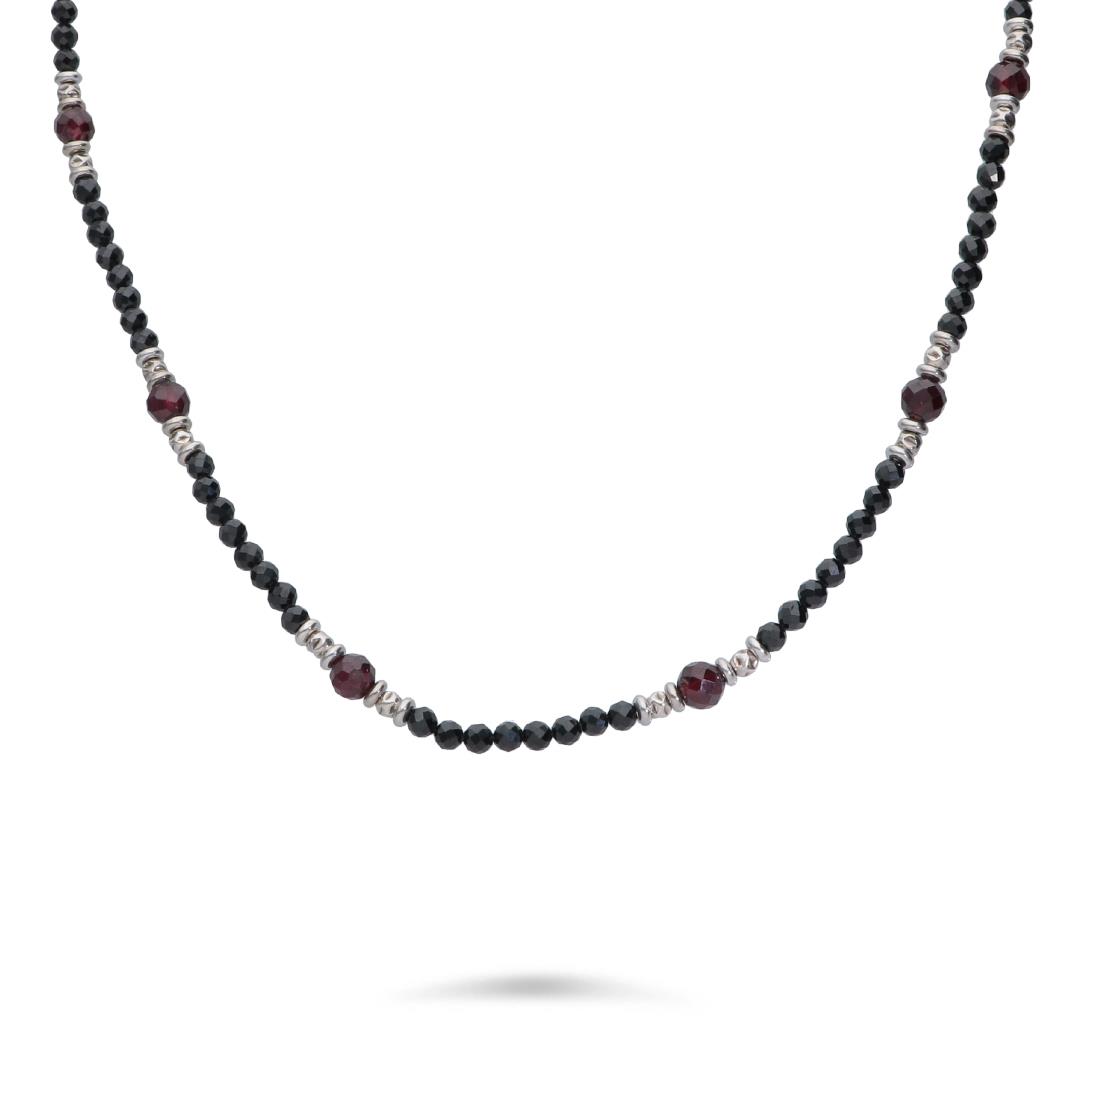 Men's silver necklace with spinel and garnet - ALFIERI & ST. JOHN 925